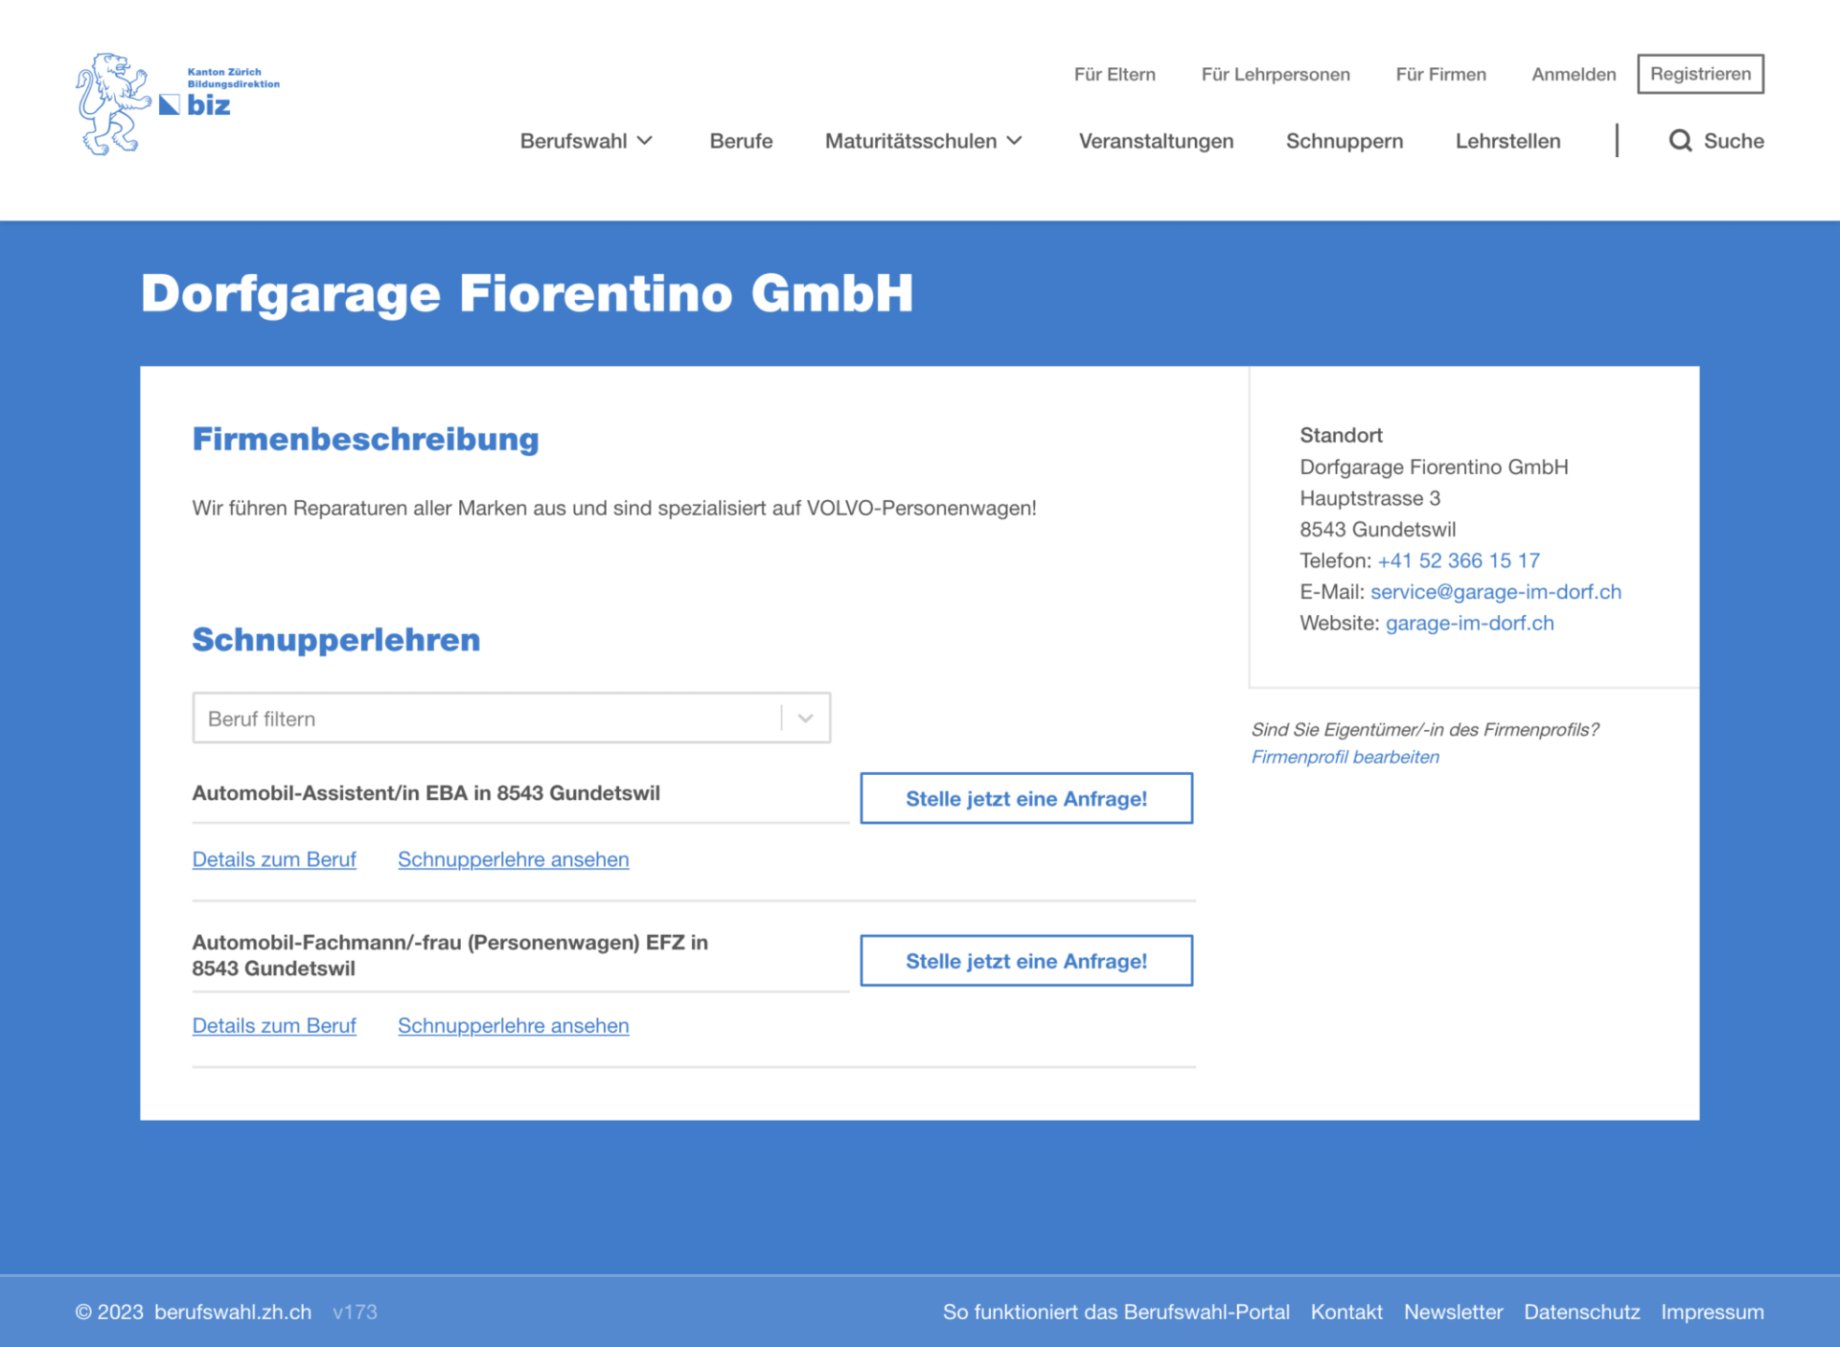 View of a company profile in the berufswahl.zh.ch web app